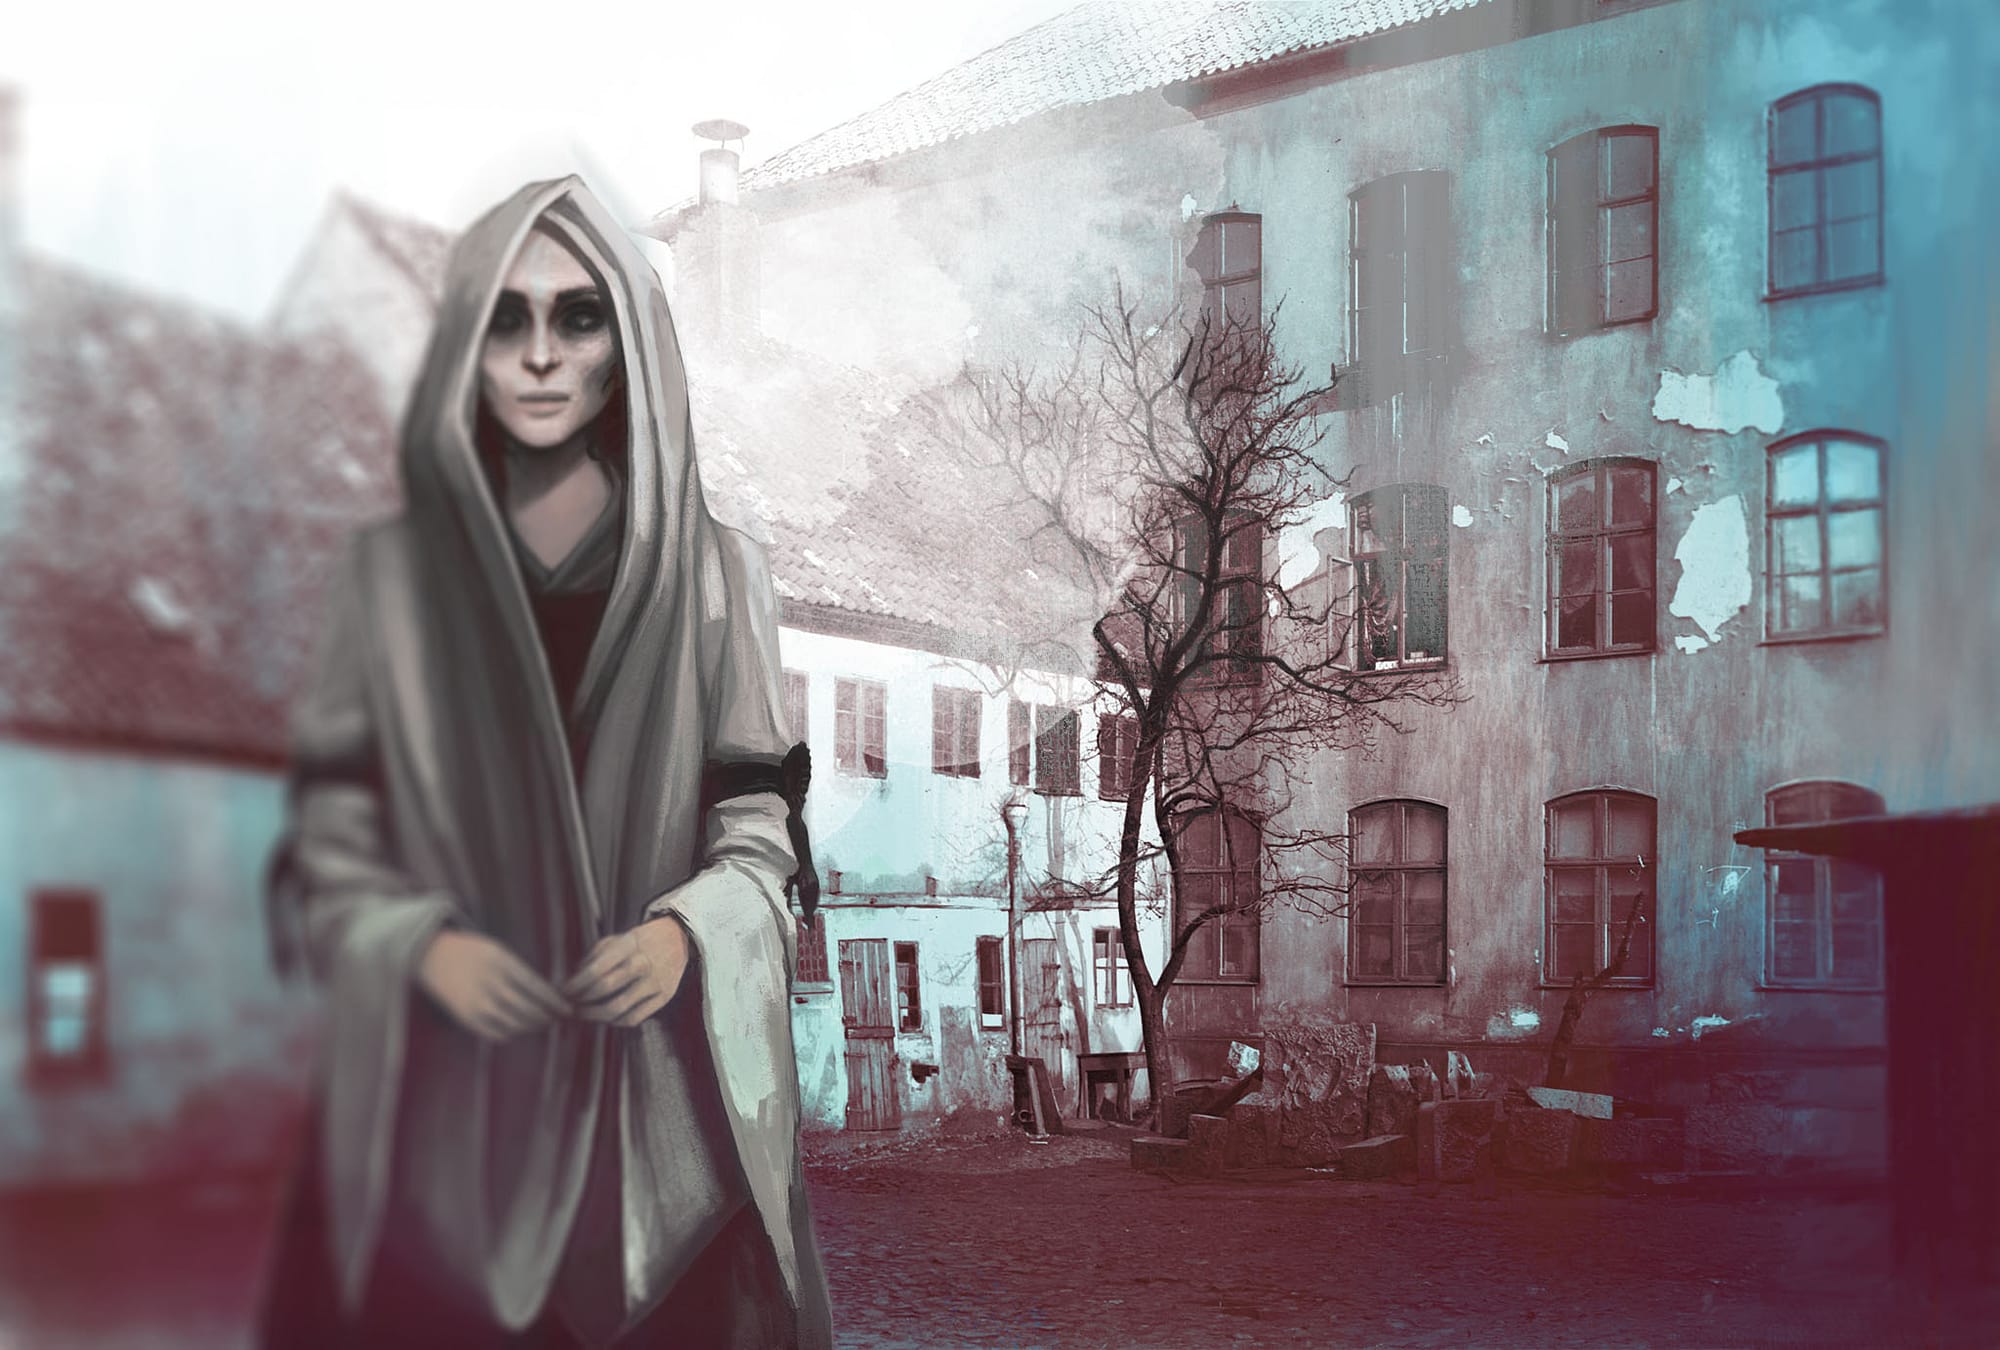 An illustration of Karna Möller in her ghost form. She is wearing a white cloak and have dark eyes.